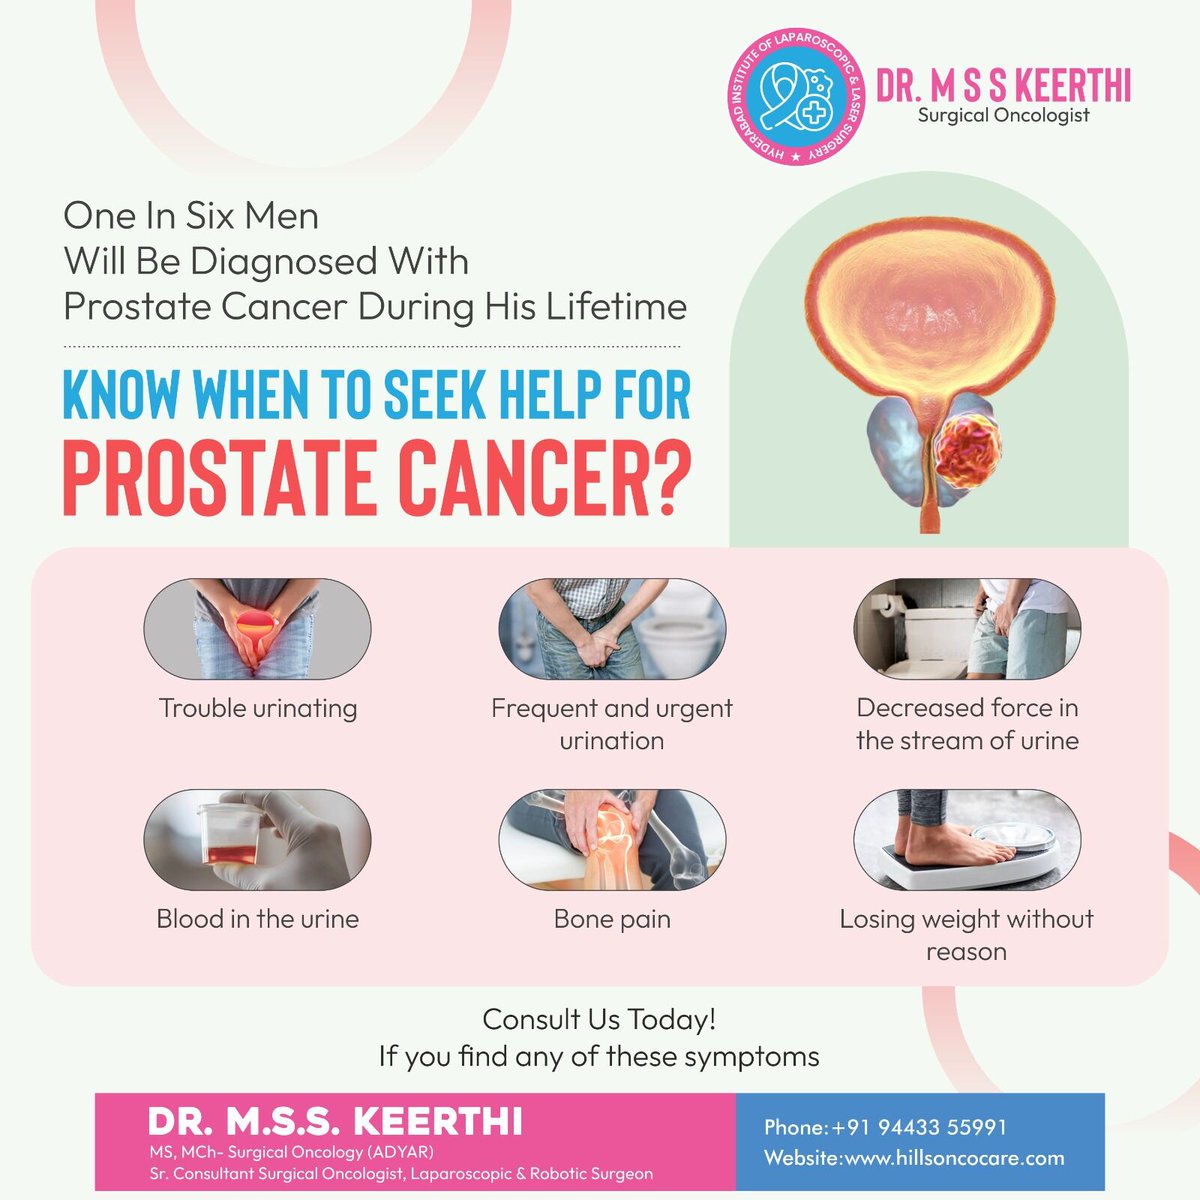 Recognizing early signs of prostate cancer is crucial. Symptoms like trouble urinating, frequent urgency, weak urine flow, blood in urine, bone pain, or weight loss shouldn’t be ignored.

#ProstateCancerAwareness #MensHealth #CancerCare #drmsskeerthi